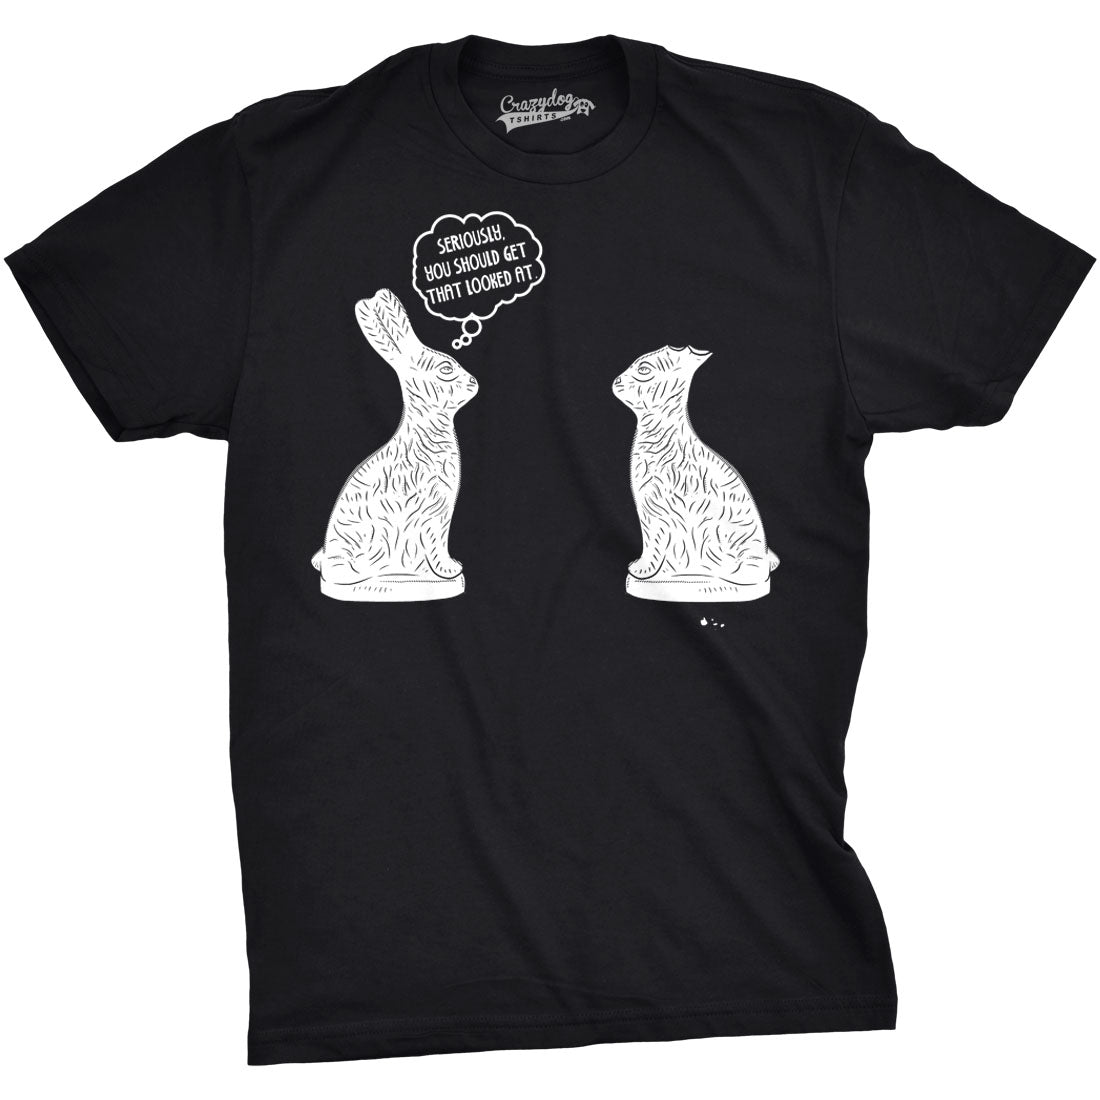 Funny Black You Should Get That Looked At Mens T Shirt Nerdy Easter Tee